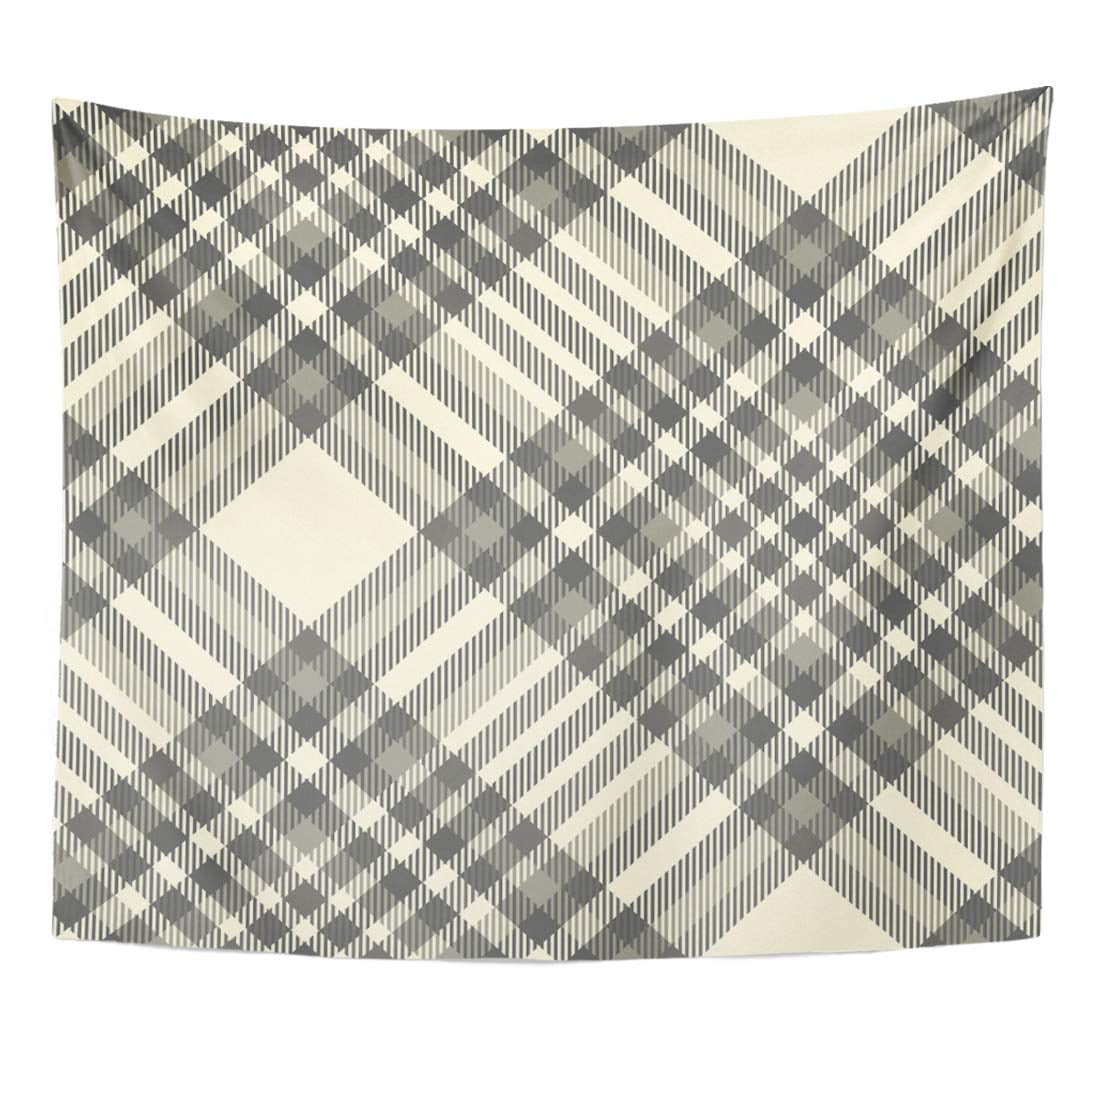 UFAEZU Classic Gray Border Plaid Check Pattern in Grey Taupe and Pale ...